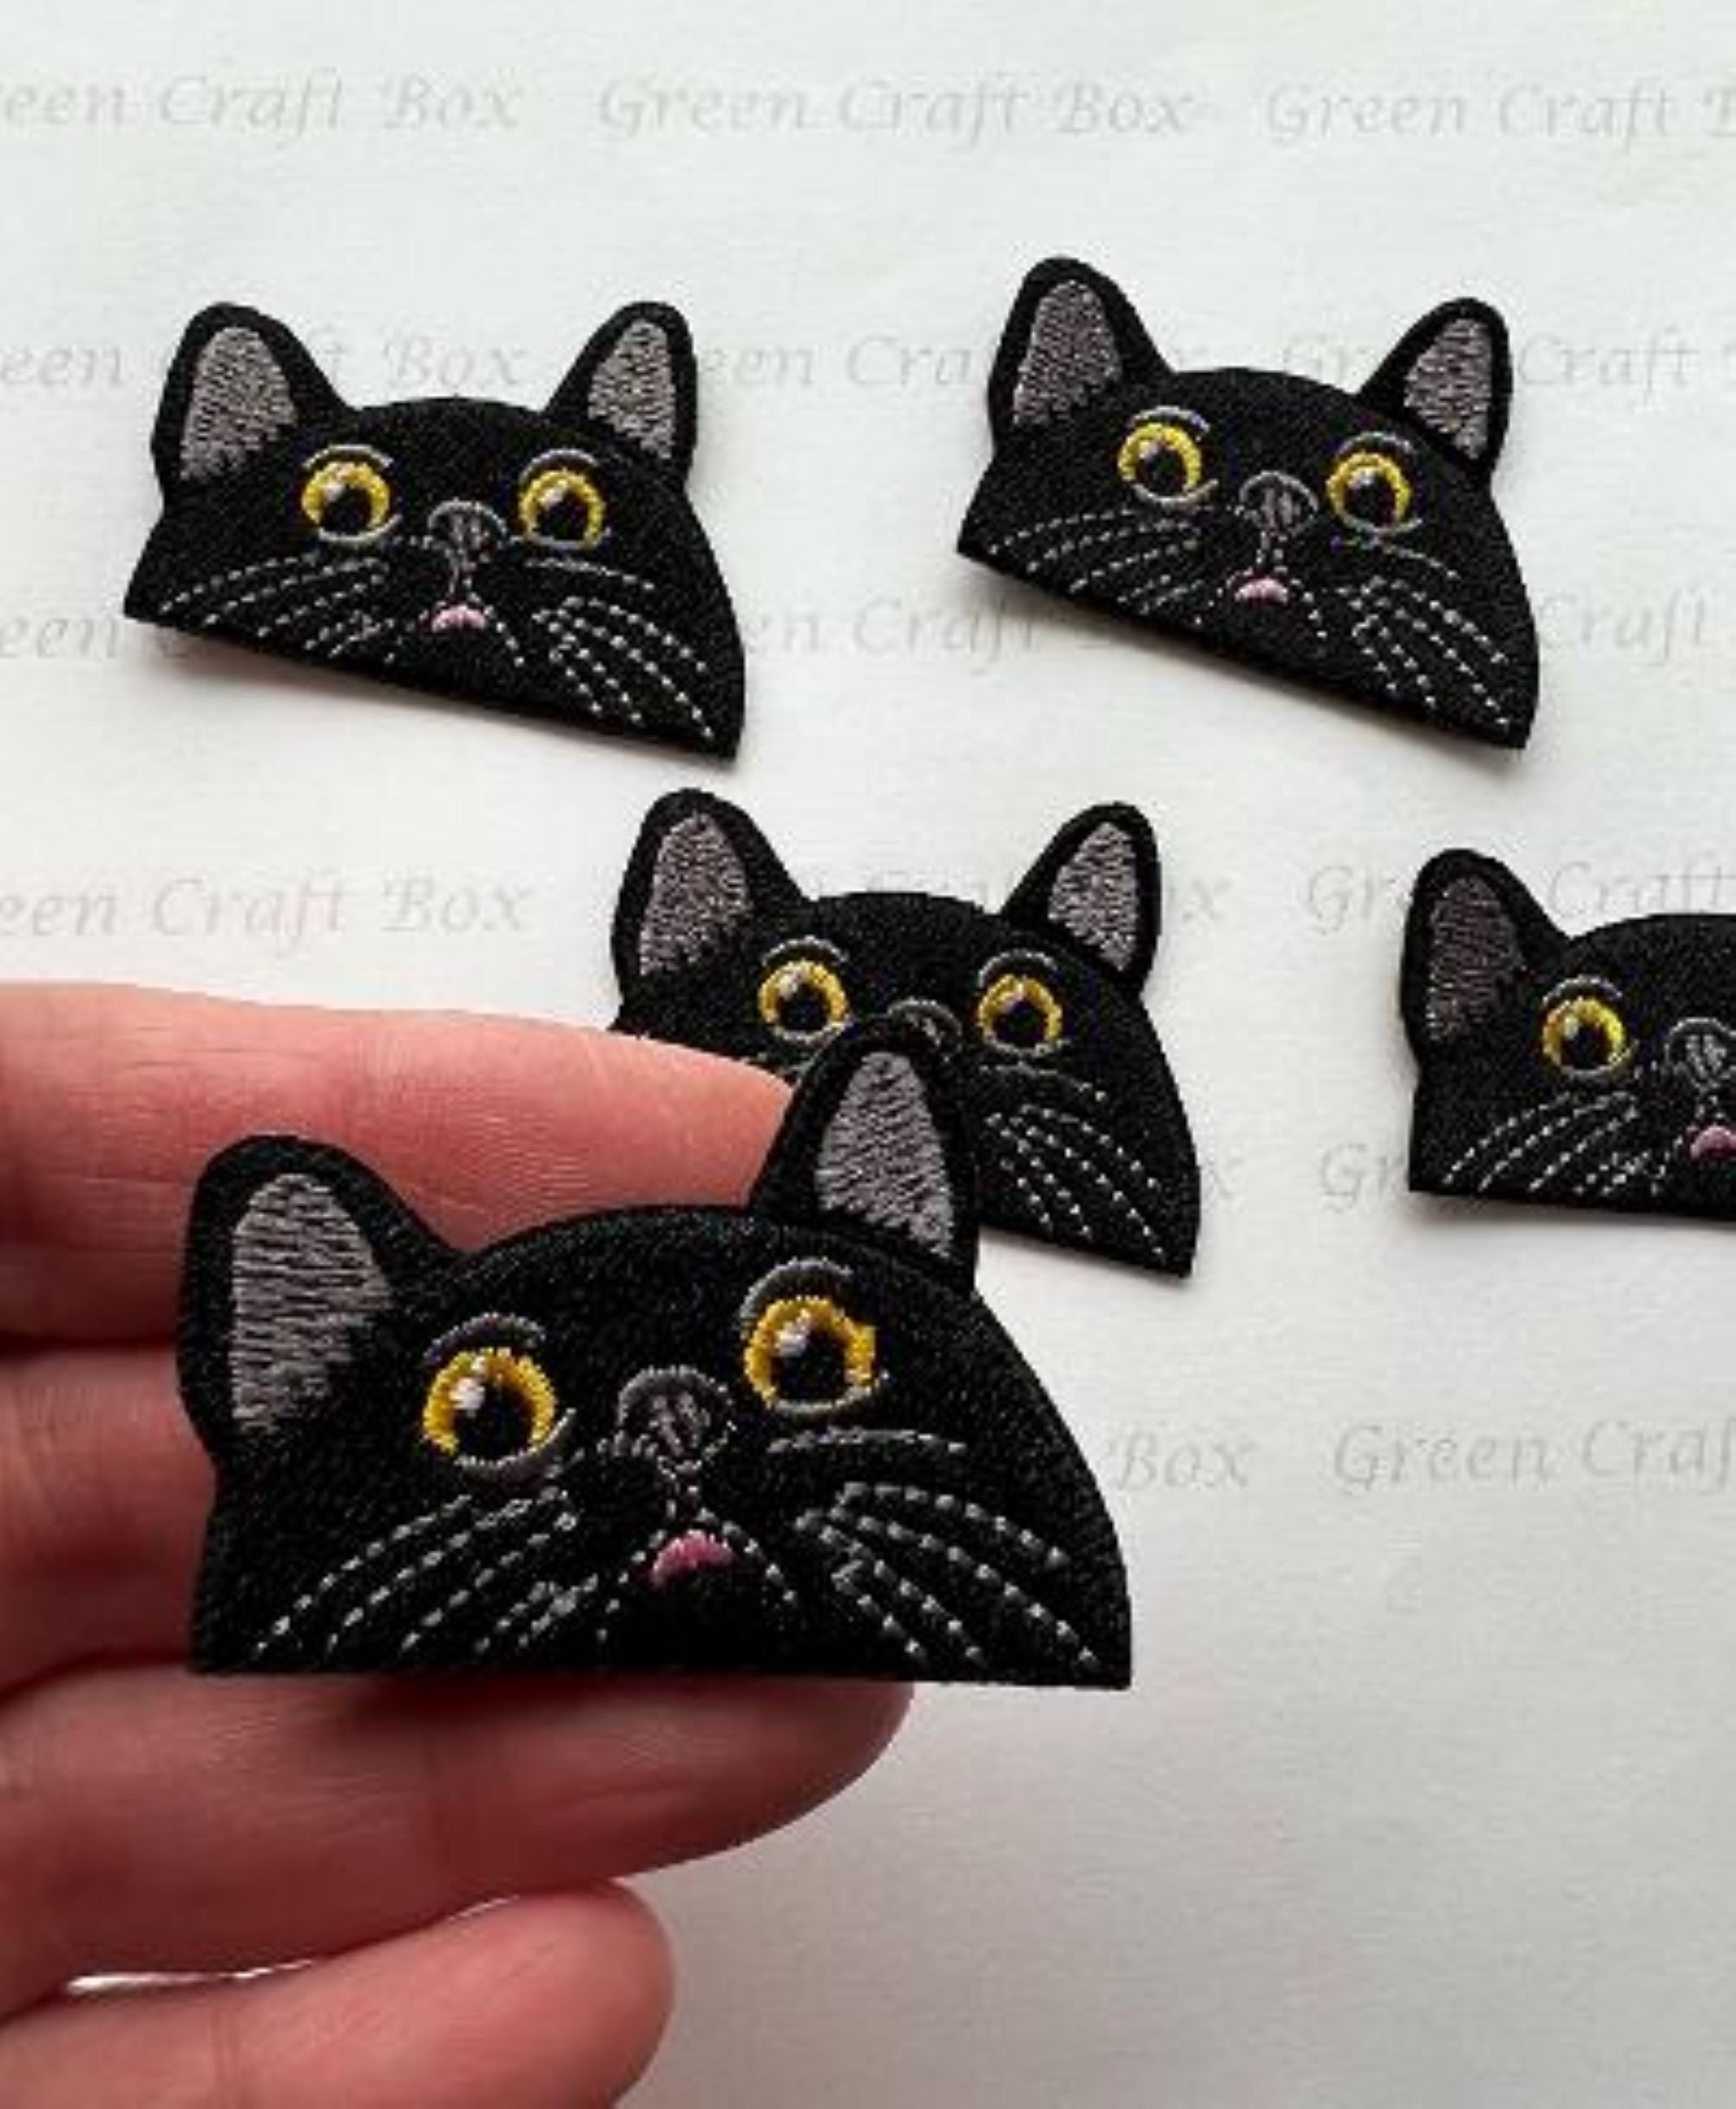 Cat Patch 12 Options Small Cat Patches Iron on Cute Iron on Cat Badge  Tuxedo Ginger Kids Christmas Gift From the Cat Stocking Stuffer 